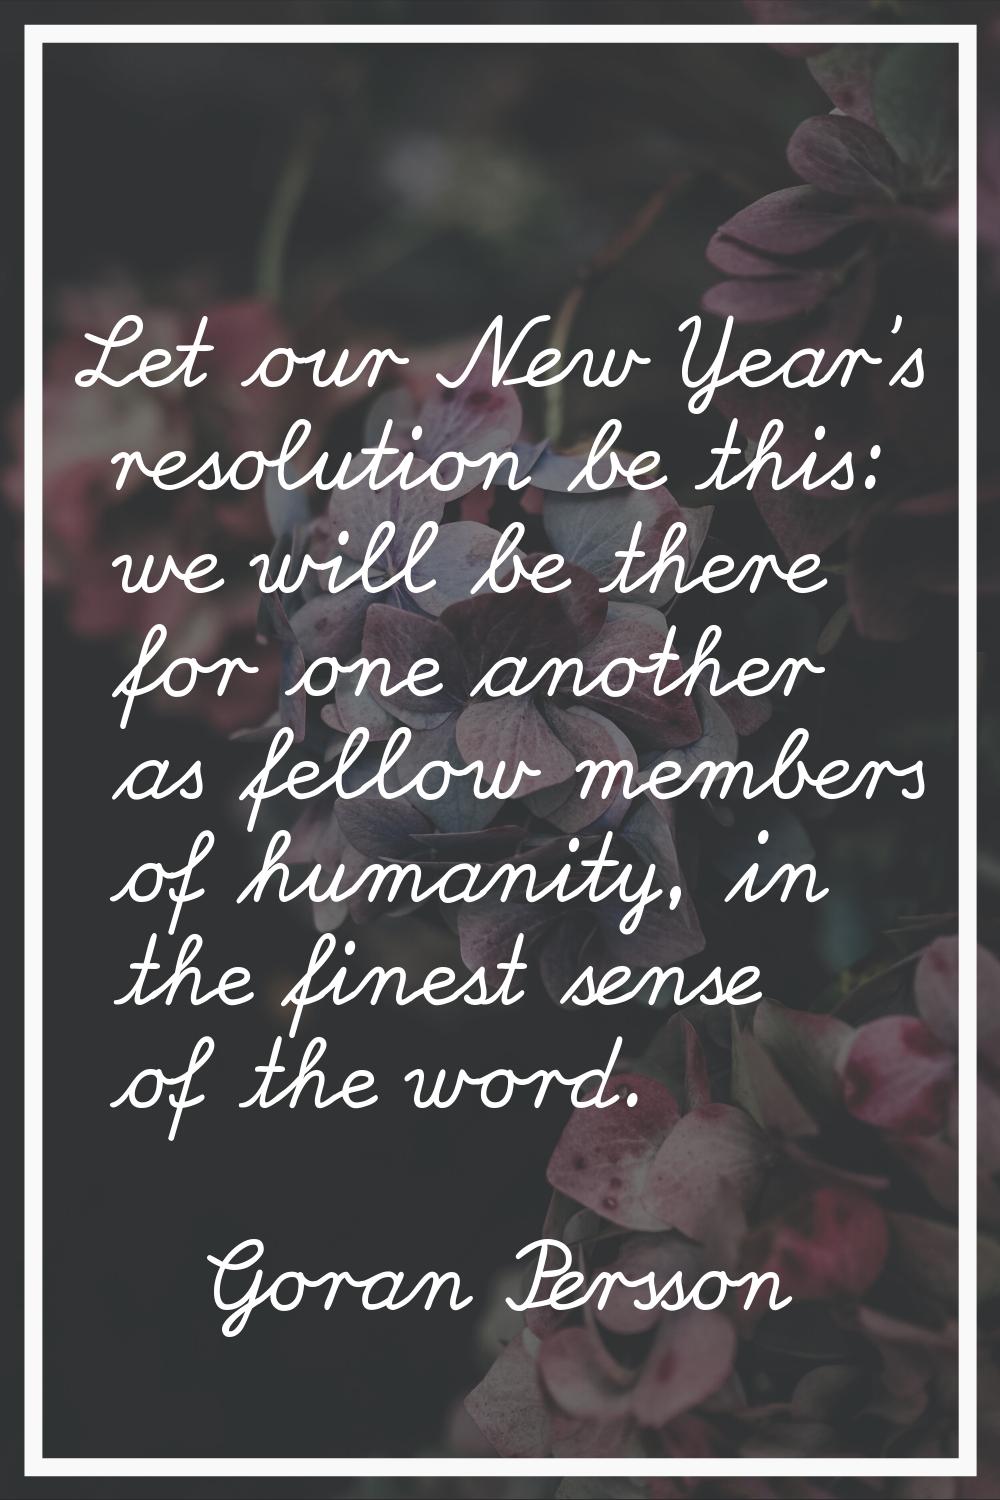 Let our New Year's resolution be this: we will be there for one another as fellow members of humani